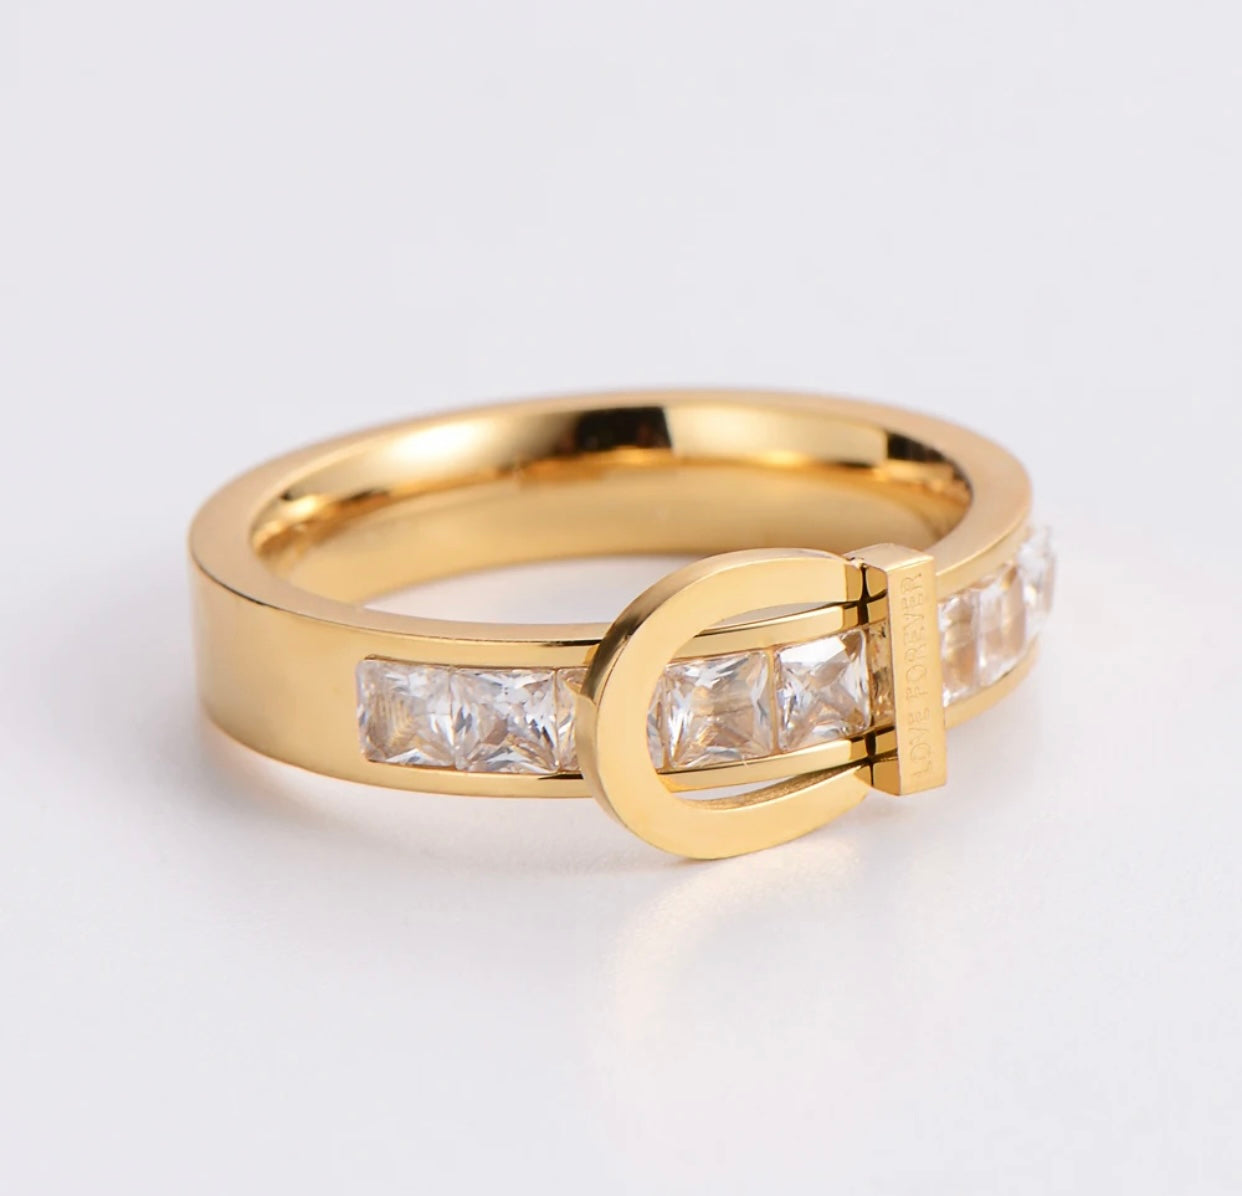 Crystal buckle exquisite ring